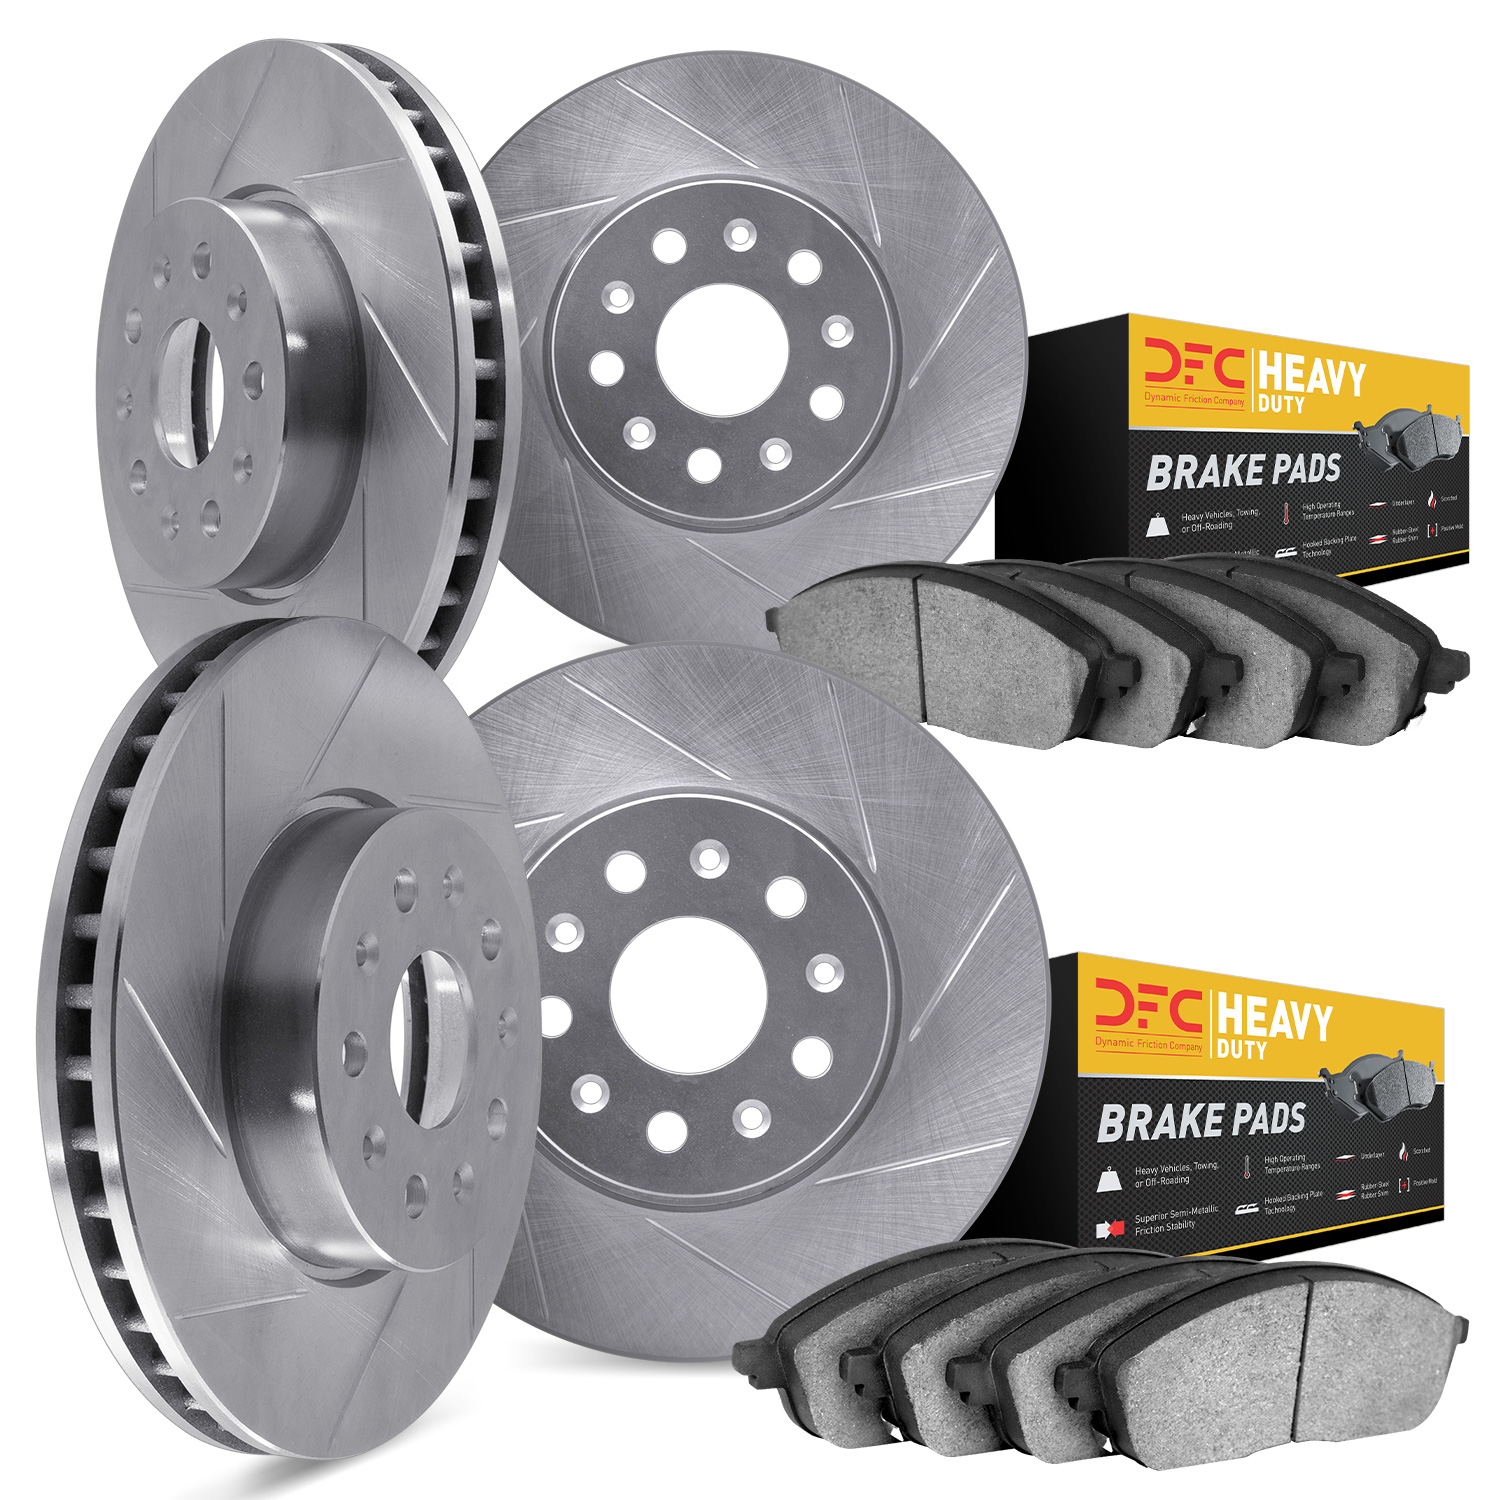 5204-55001 Slotted Brake Rotors w/Heavy-Duty Brake Pads Kits [Silver], 2003-2011 Ford/Lincoln/Mercury/Mazda, Position: Front and